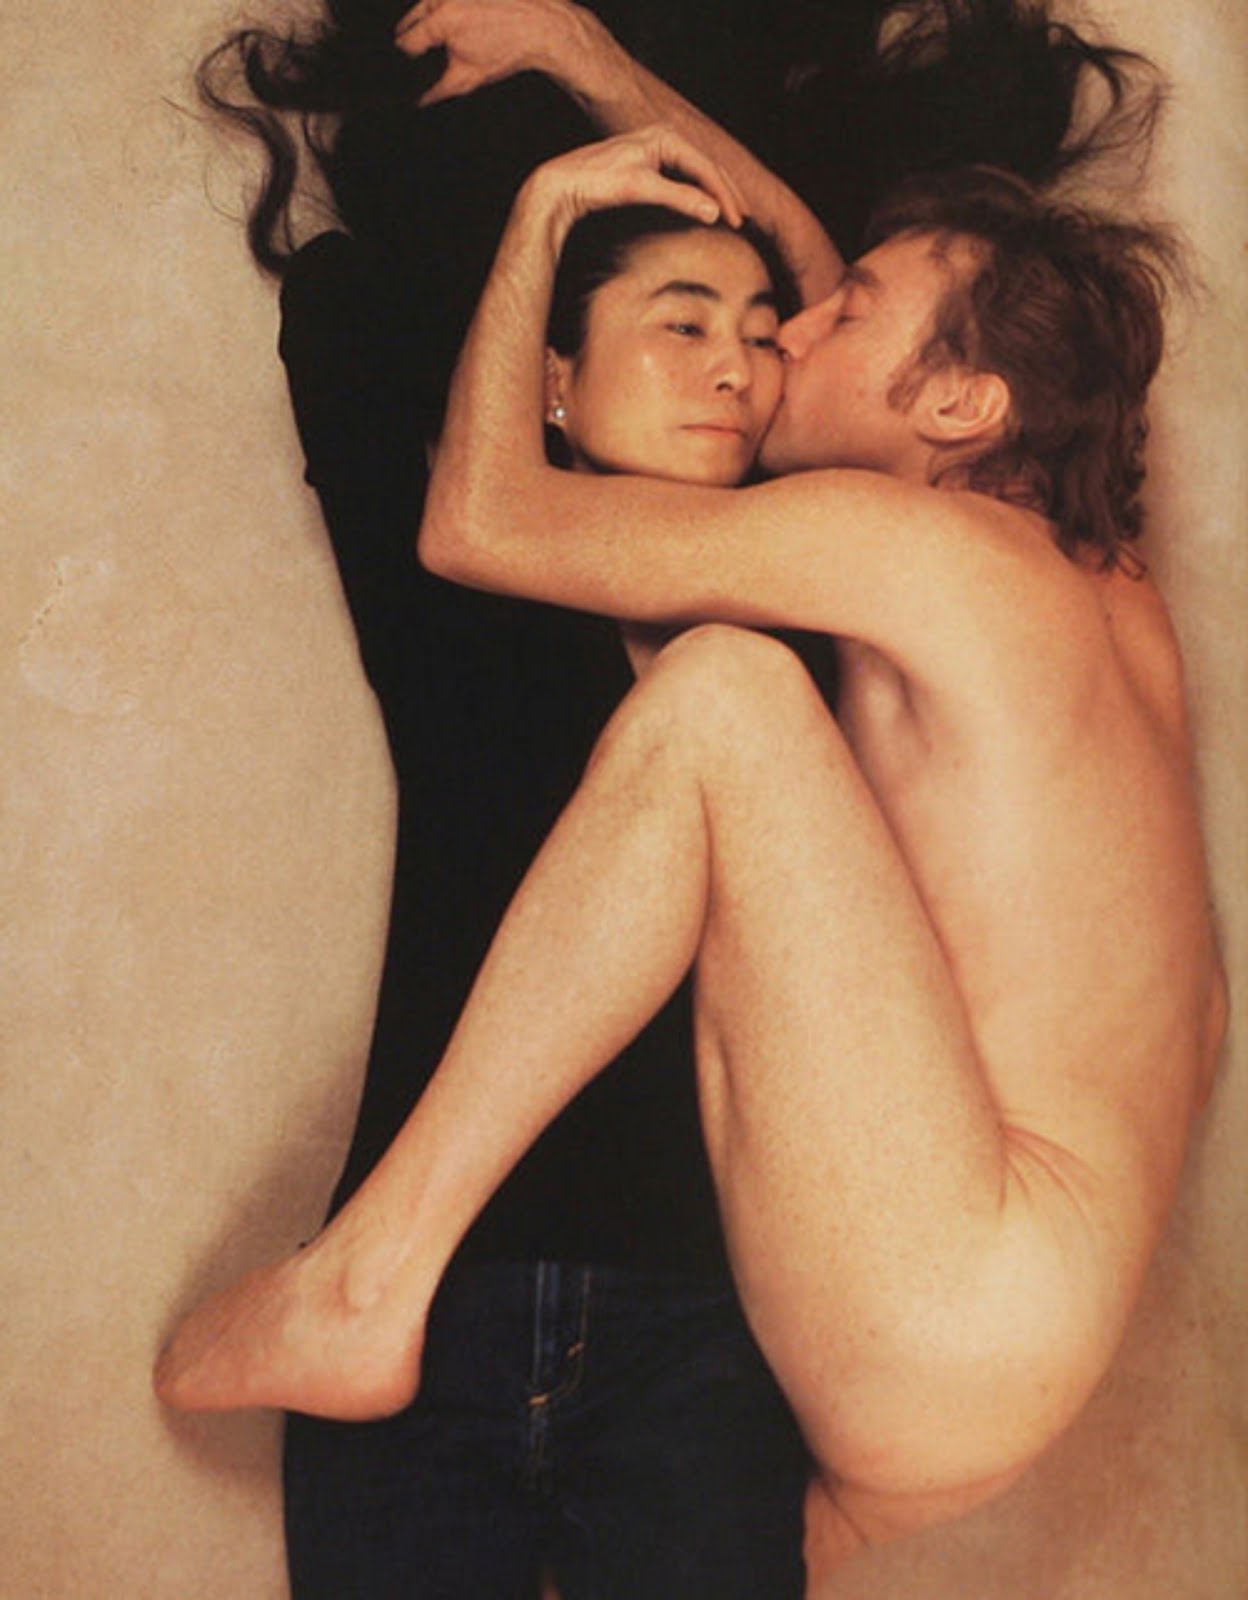 ROLLING STONE FRONT COVER - YOKO ONO DRESSED WITH JOHN LENNON NAKED